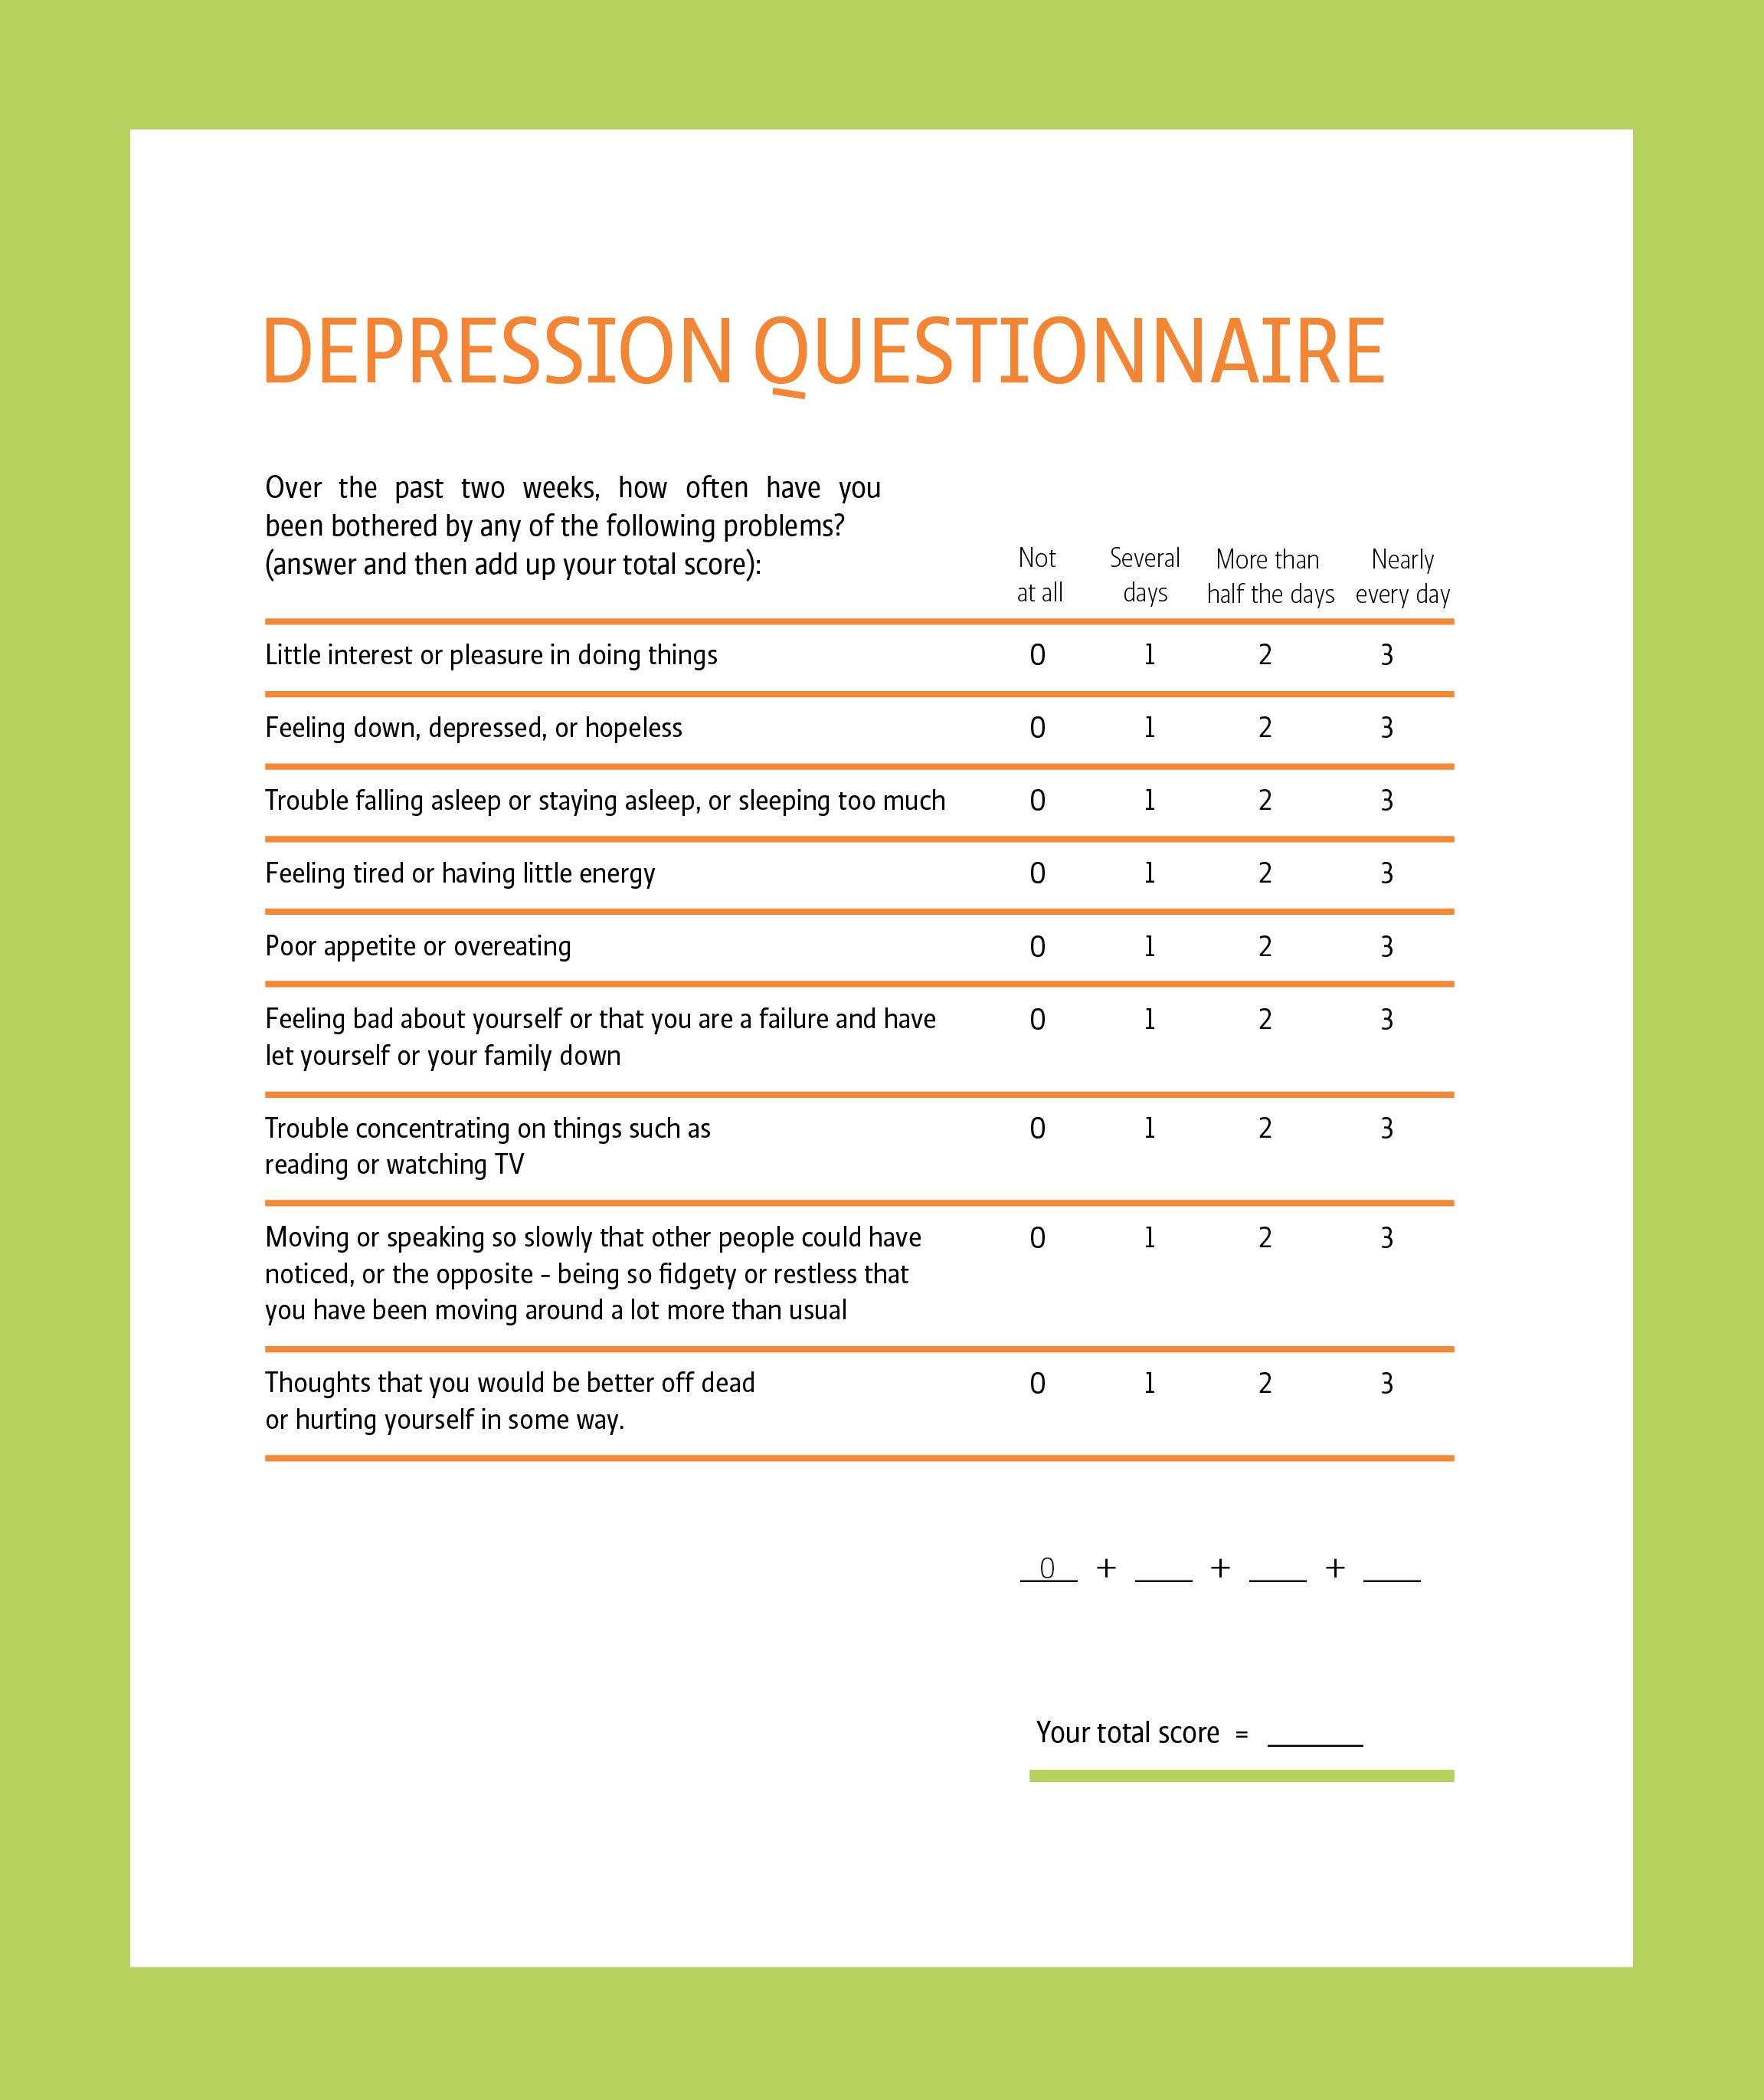 beck hopelessness scale questionnaire